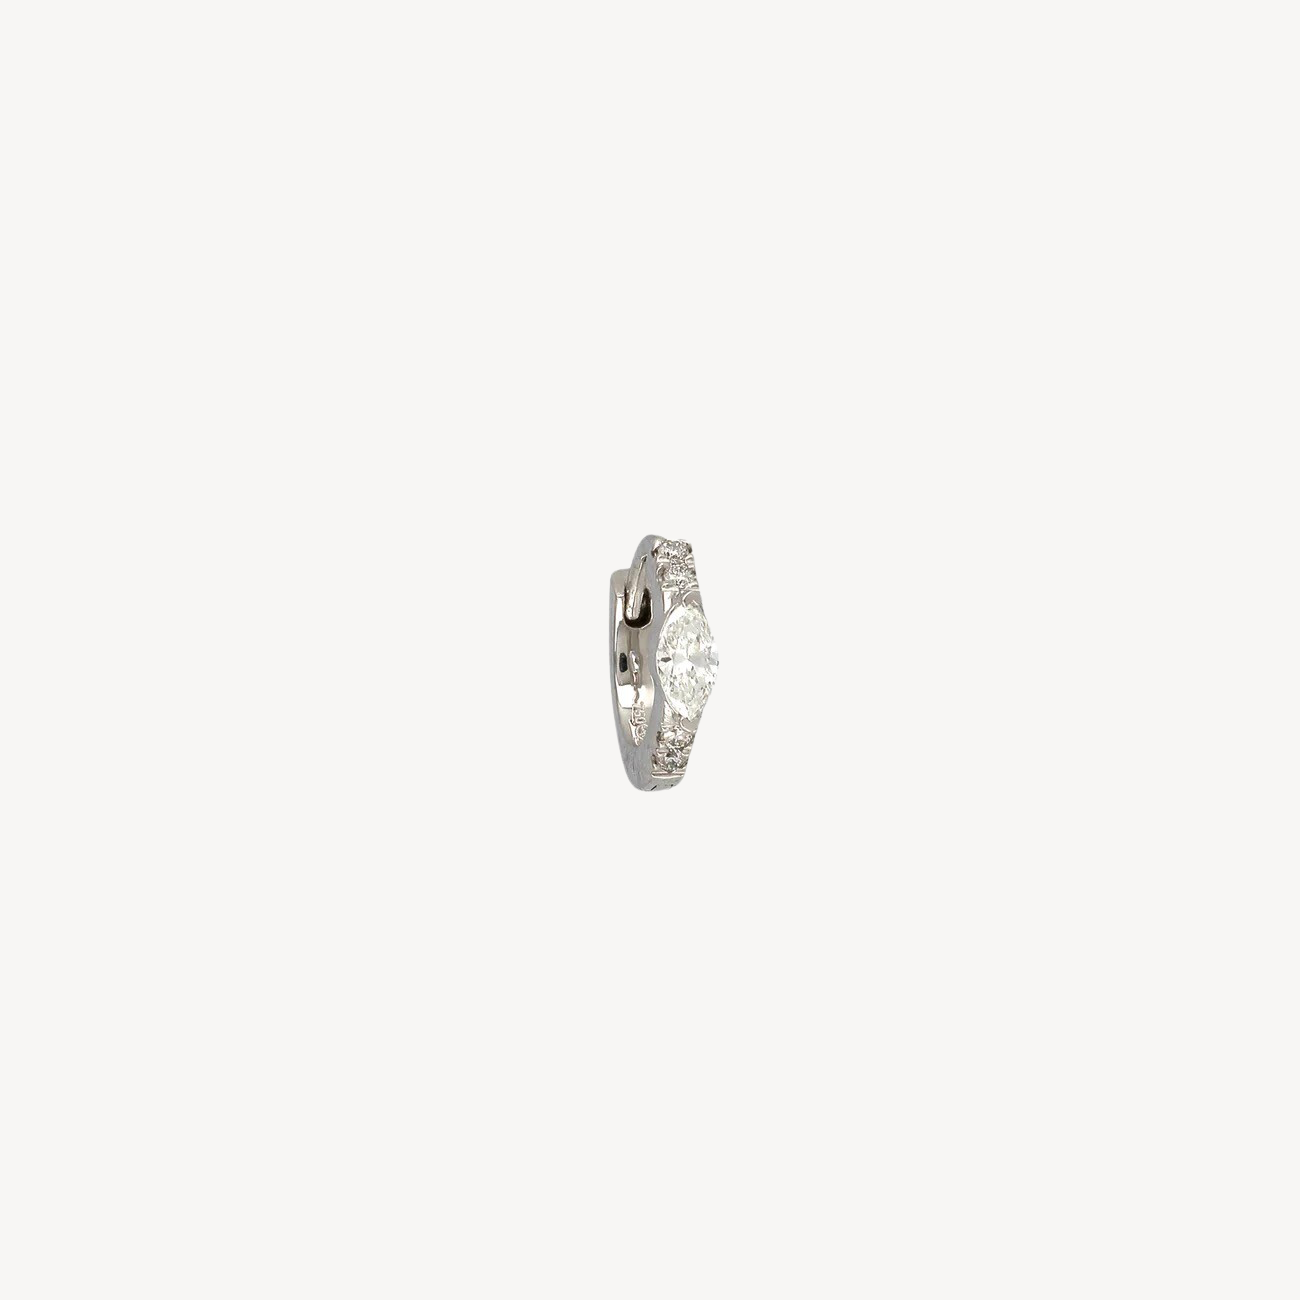 2.8mm Marquise 6.5mm Half Paved White Gold Hoop